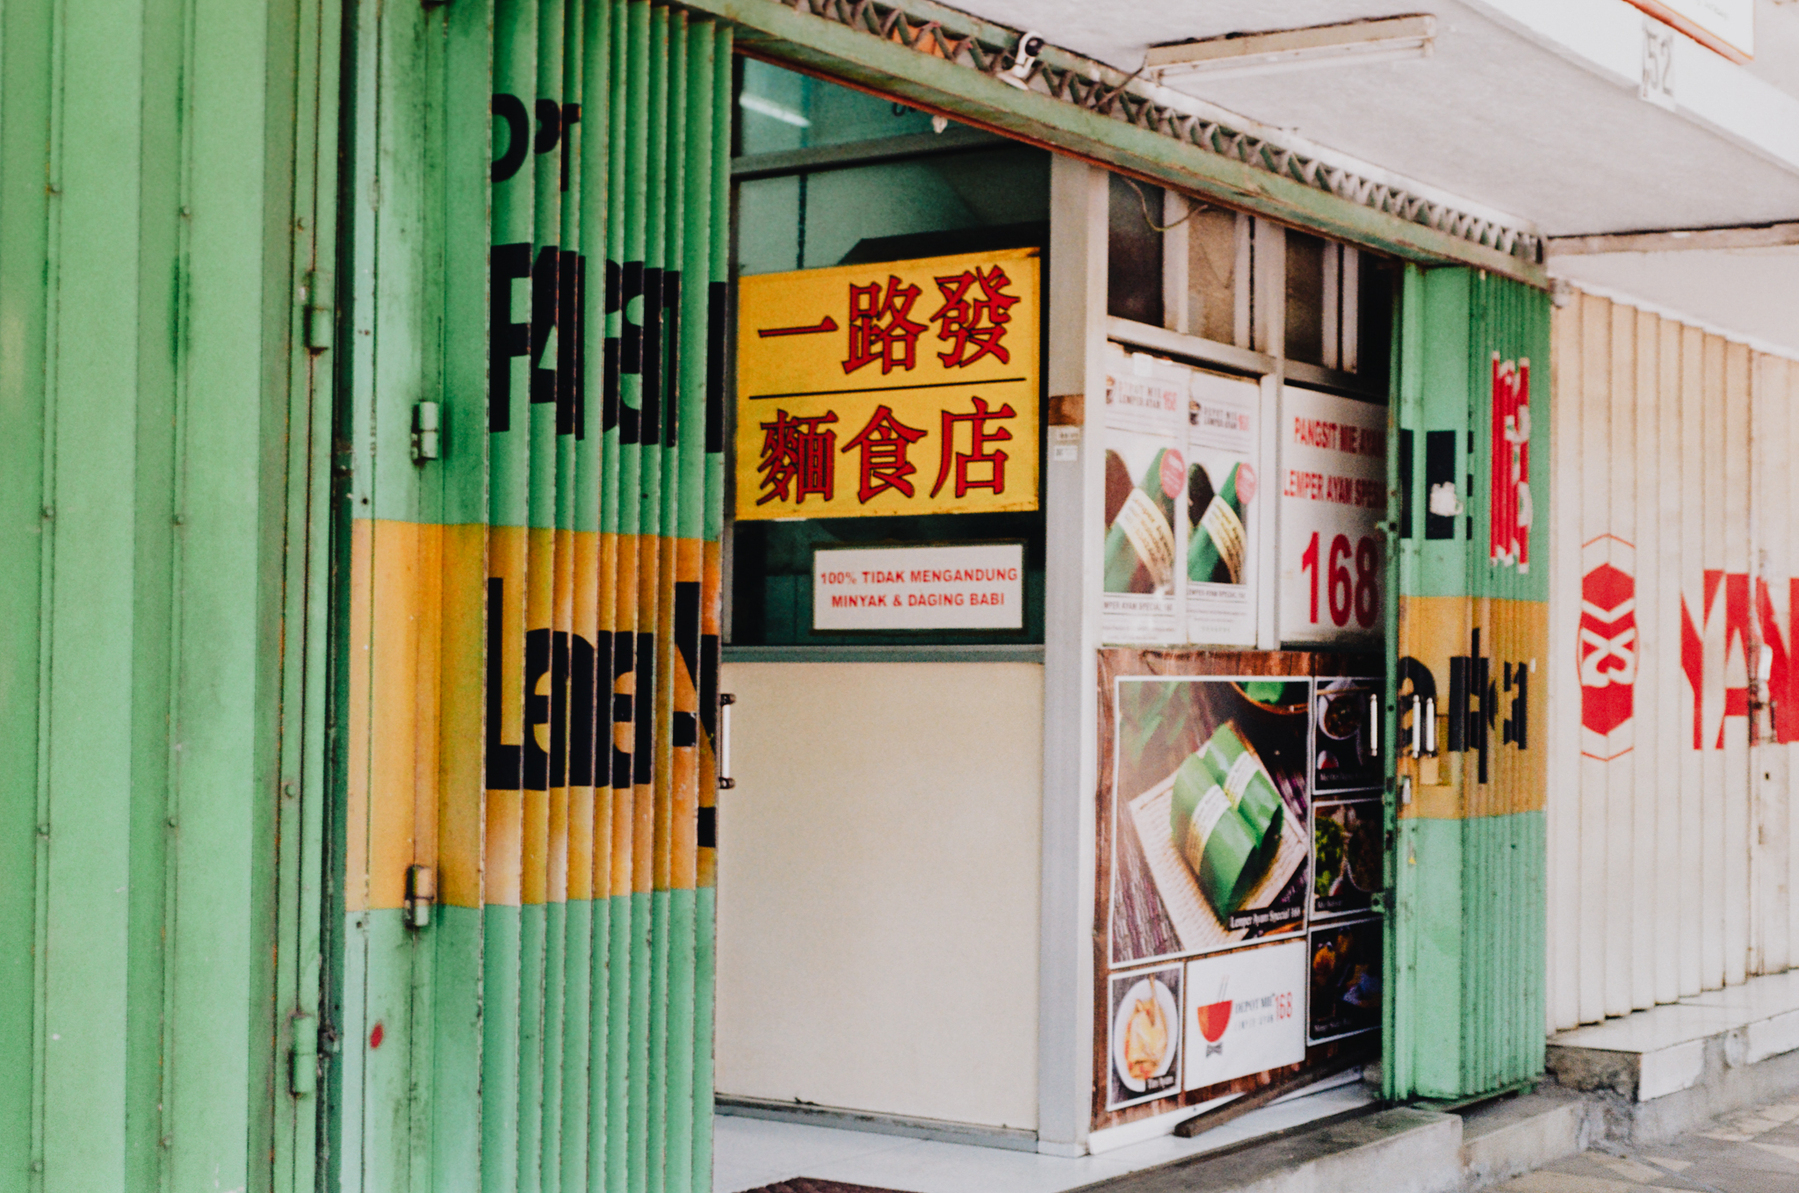 a scan of a color photo showing a Chinese Indonesian noodle shop in old Surabaya with Chinese and Indonesian words. The door is green with yellow features